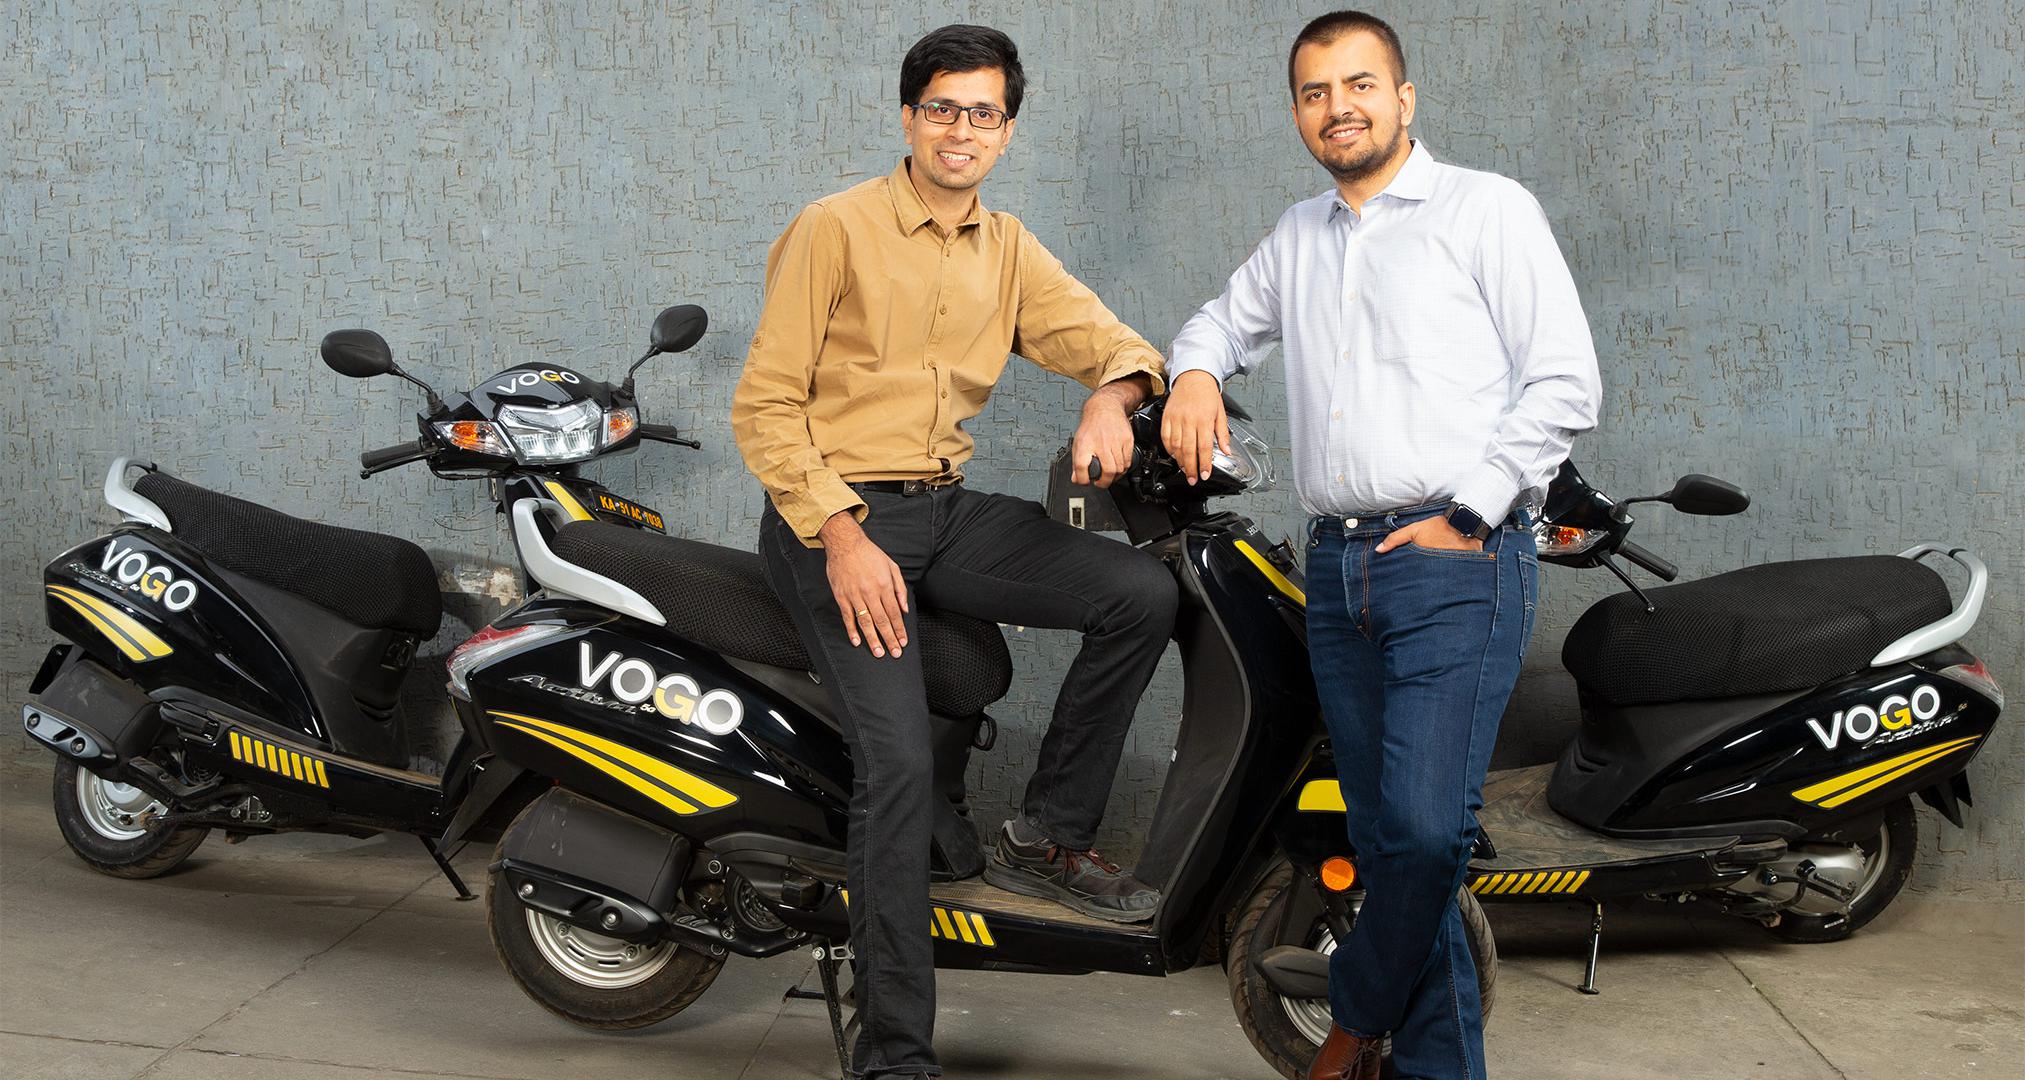 Ola, Uber's India rival, invests $100M in scooter rental startup Vogo | TechCrunch